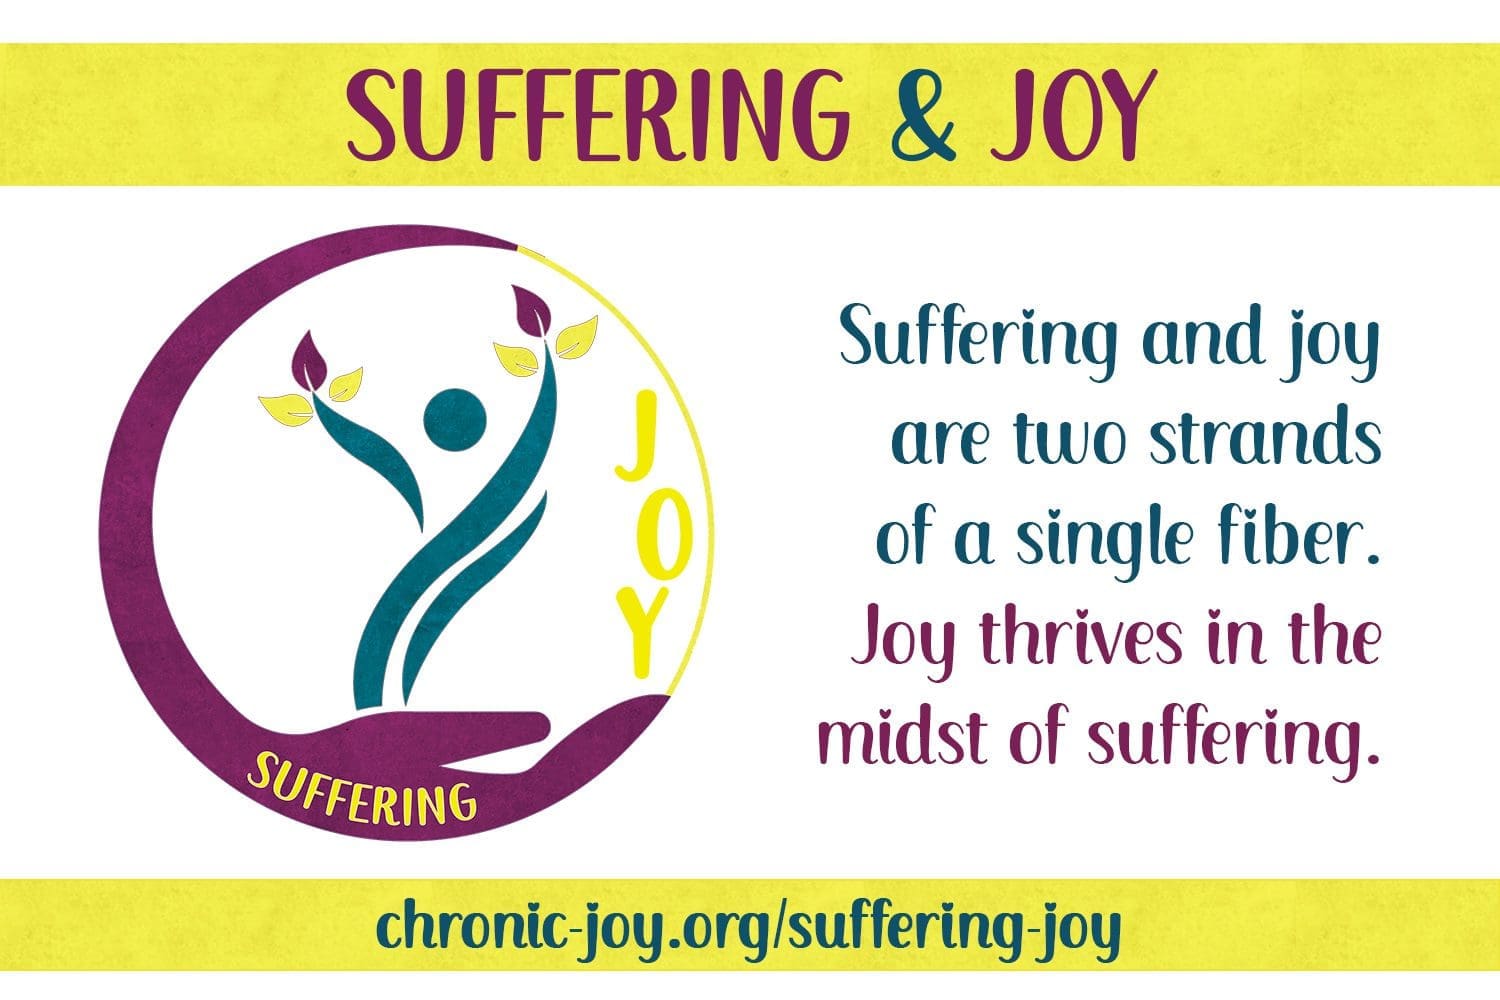 Suffering and joy are two strands of a single fiber. Joy thrives in the midst of suffering.